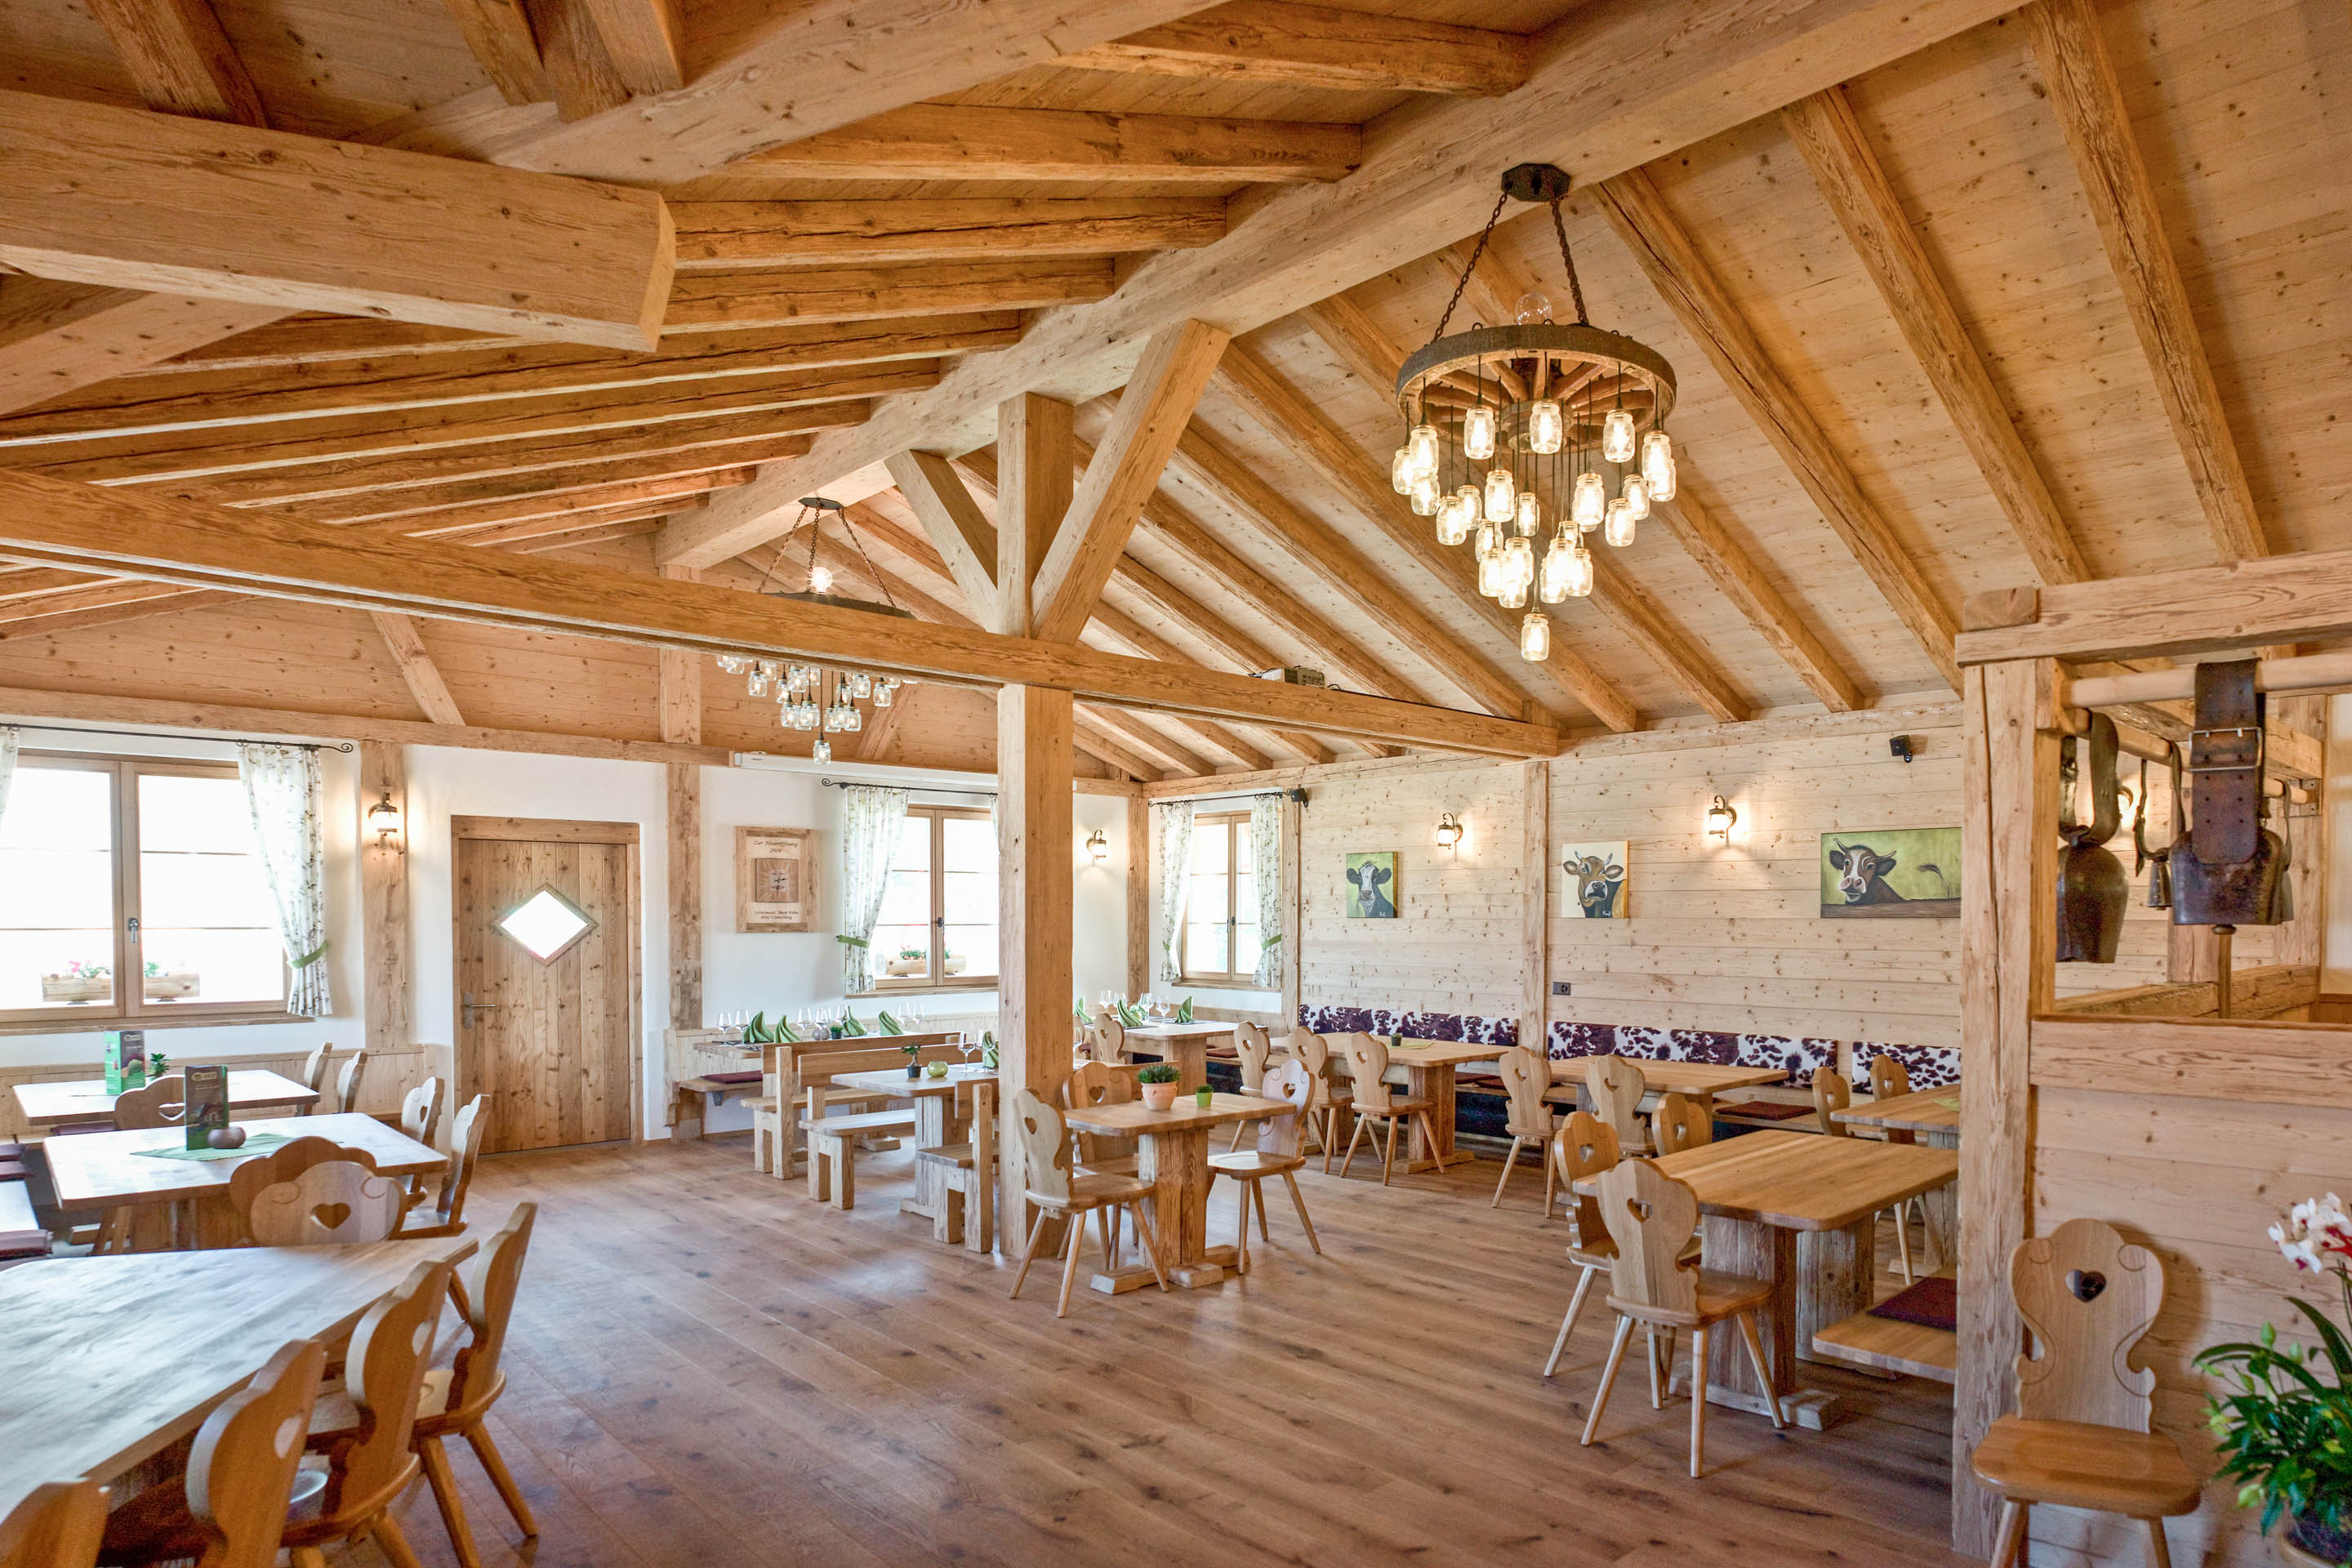 RESTAURANT Q-HOF MOSTELBERG | Antique construction timber spruche/fir steamed chopped slightly brushed and antique facades Pizol spruce heat-treated chopped brushed